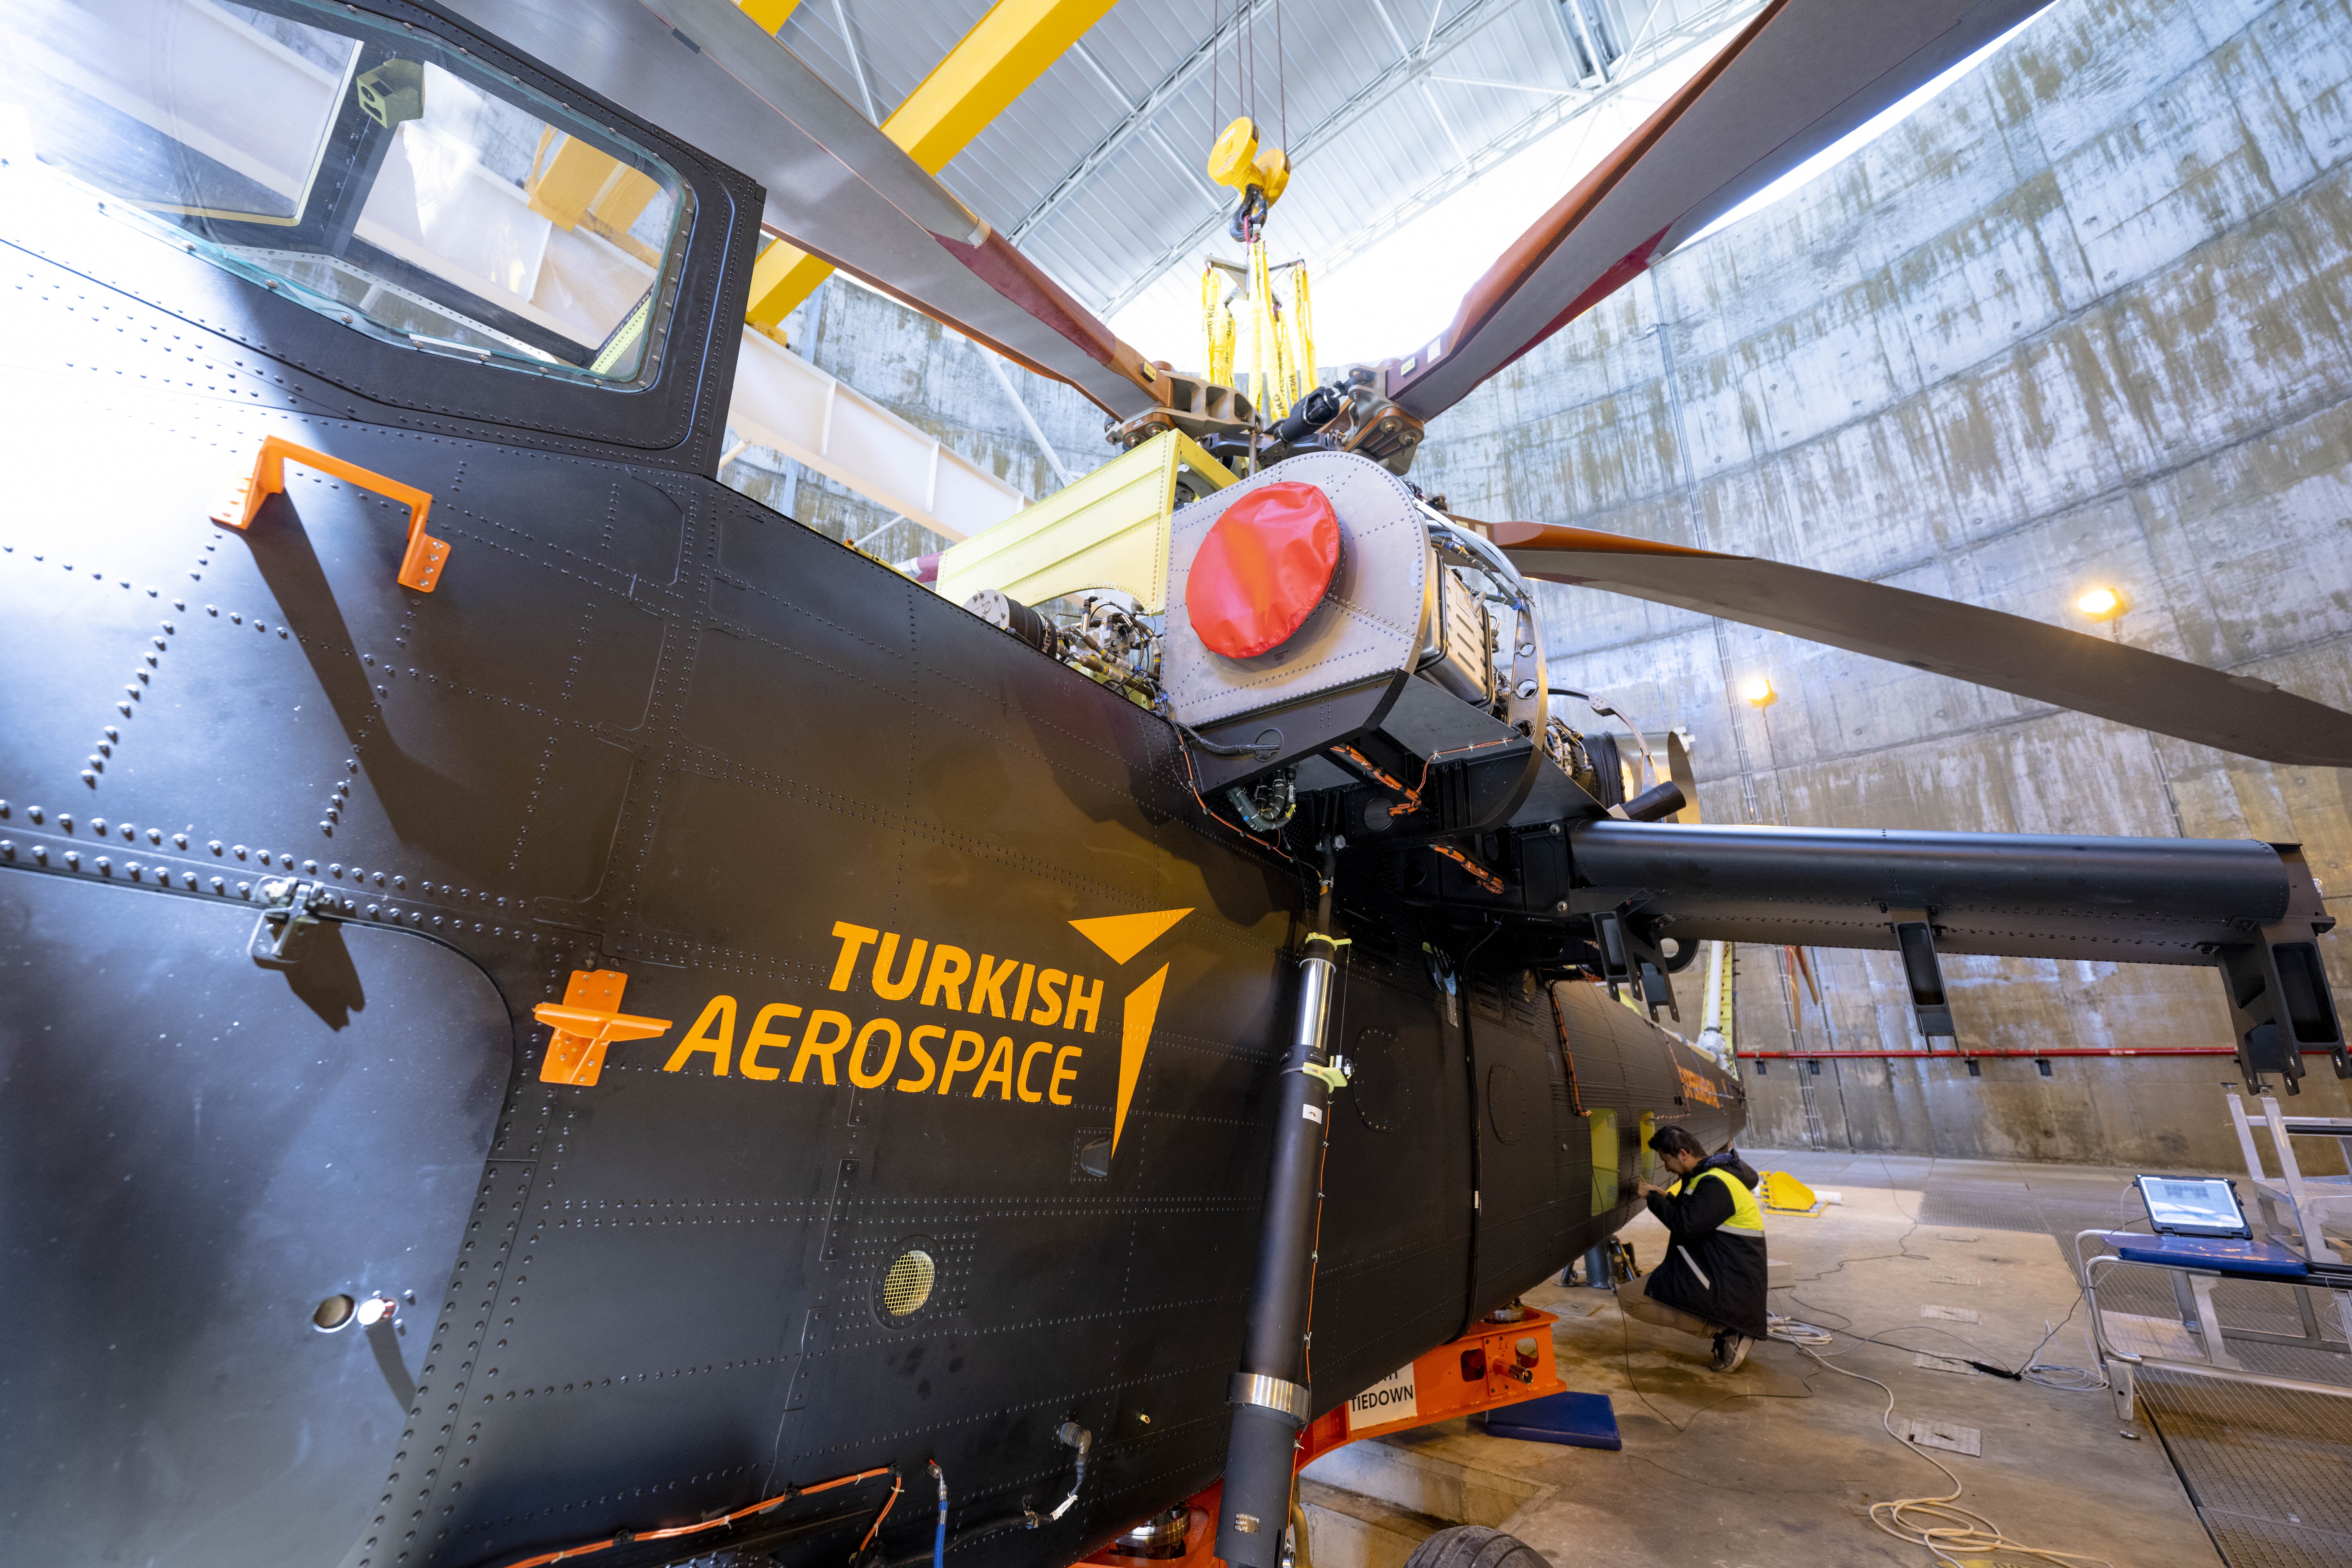 ANKARA, TURKIYE - APRIL 24: A view of the ATAK-2 heavy attack helicopter, developed within the scope of Heavy Class Attack Helicopter Project under progress by Turkish Aerospace Industries (TAI) and Turkish Defence Industry Agency, in Ankara, Turkiye on April 24, 2023. (Photo by Aytac Unal/Anadolu Agency via Getty Images)